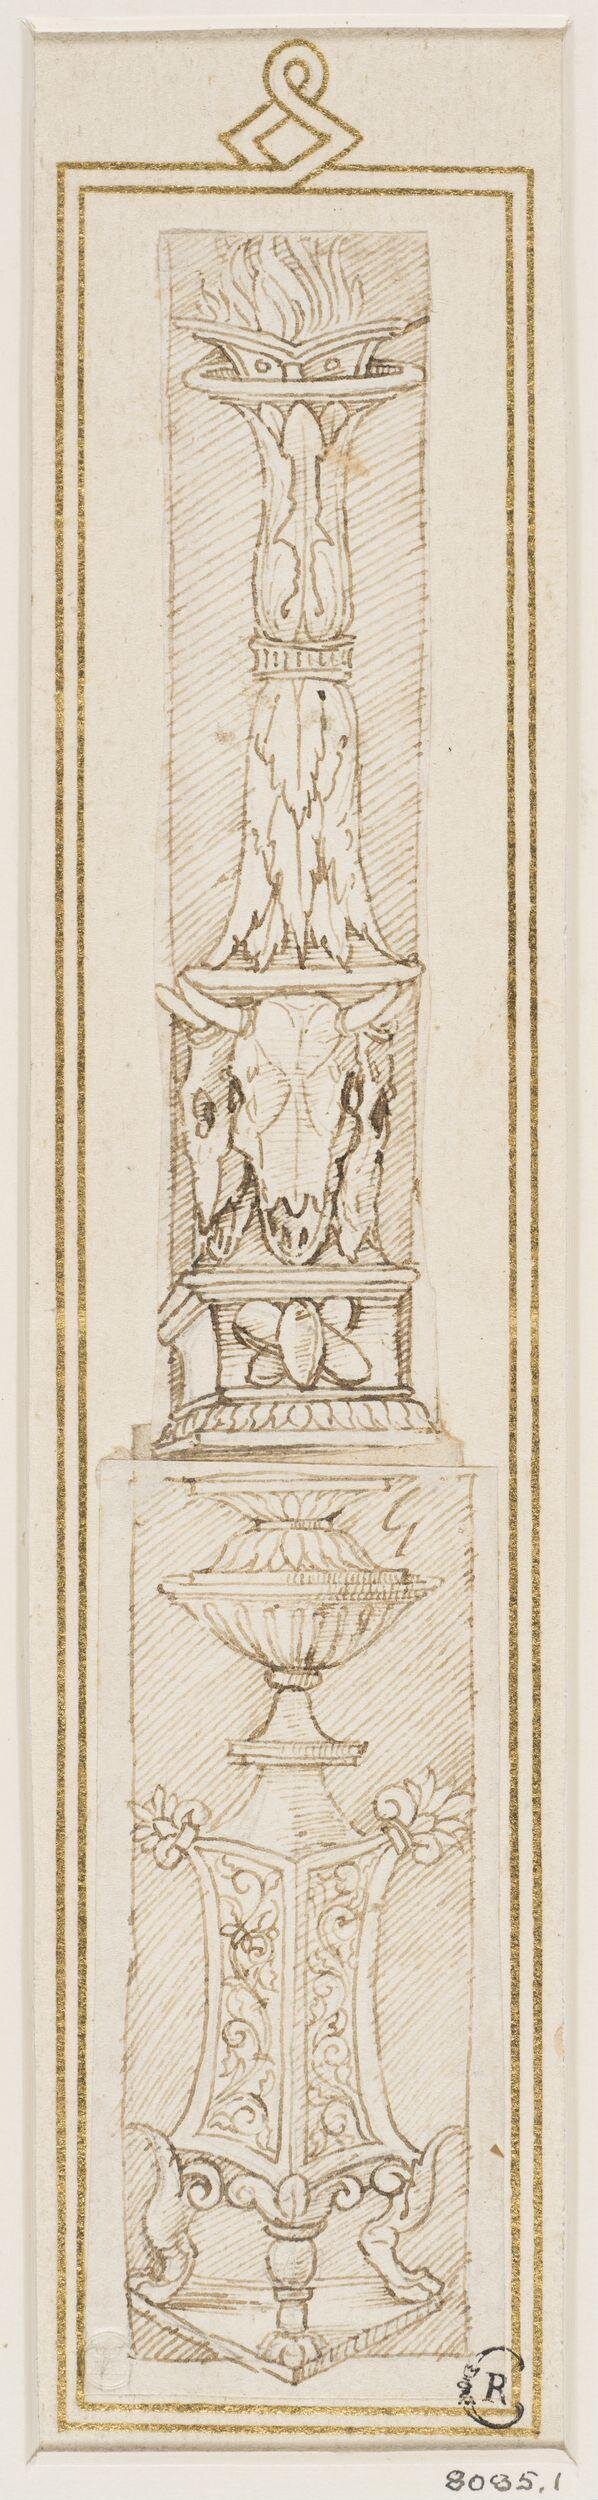 Designs for pilaster ornament composed of a classical candelabrum top image